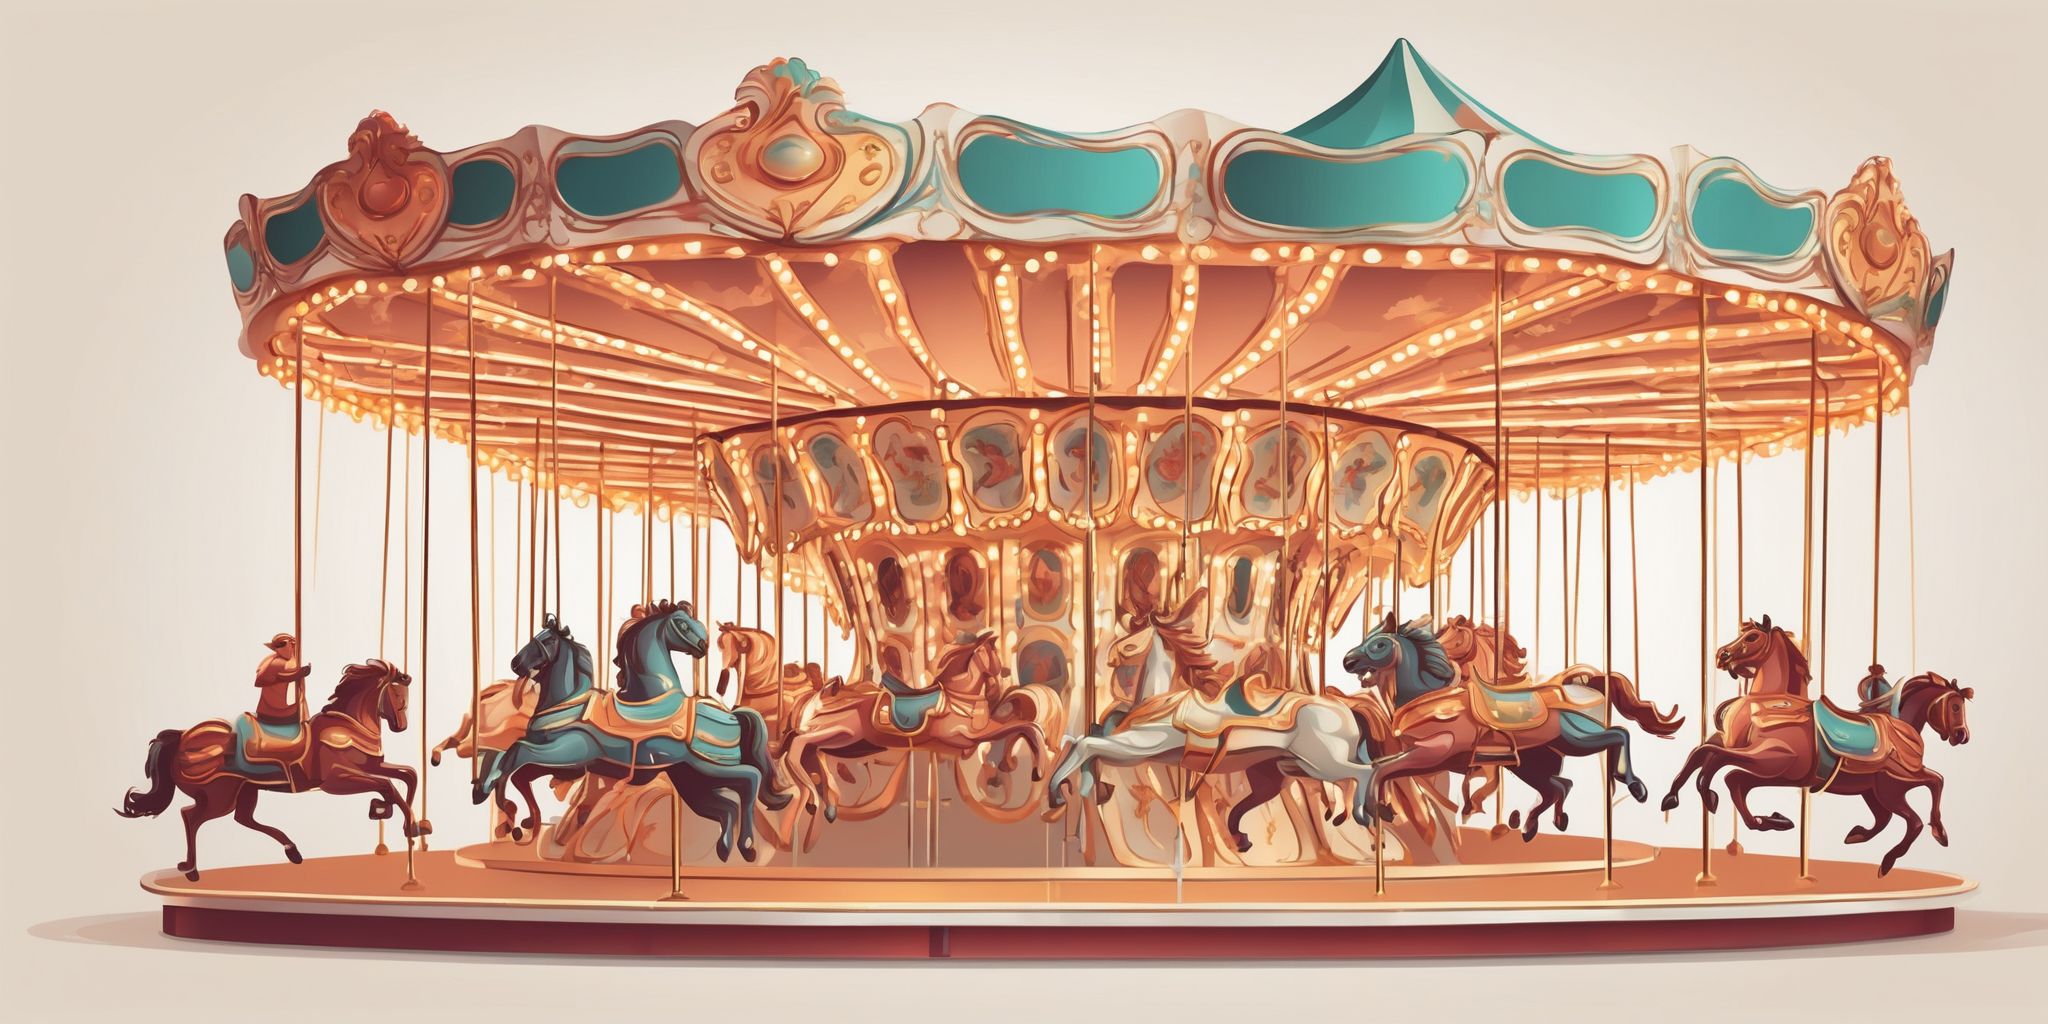 carousel in illustration style with gradients and white background